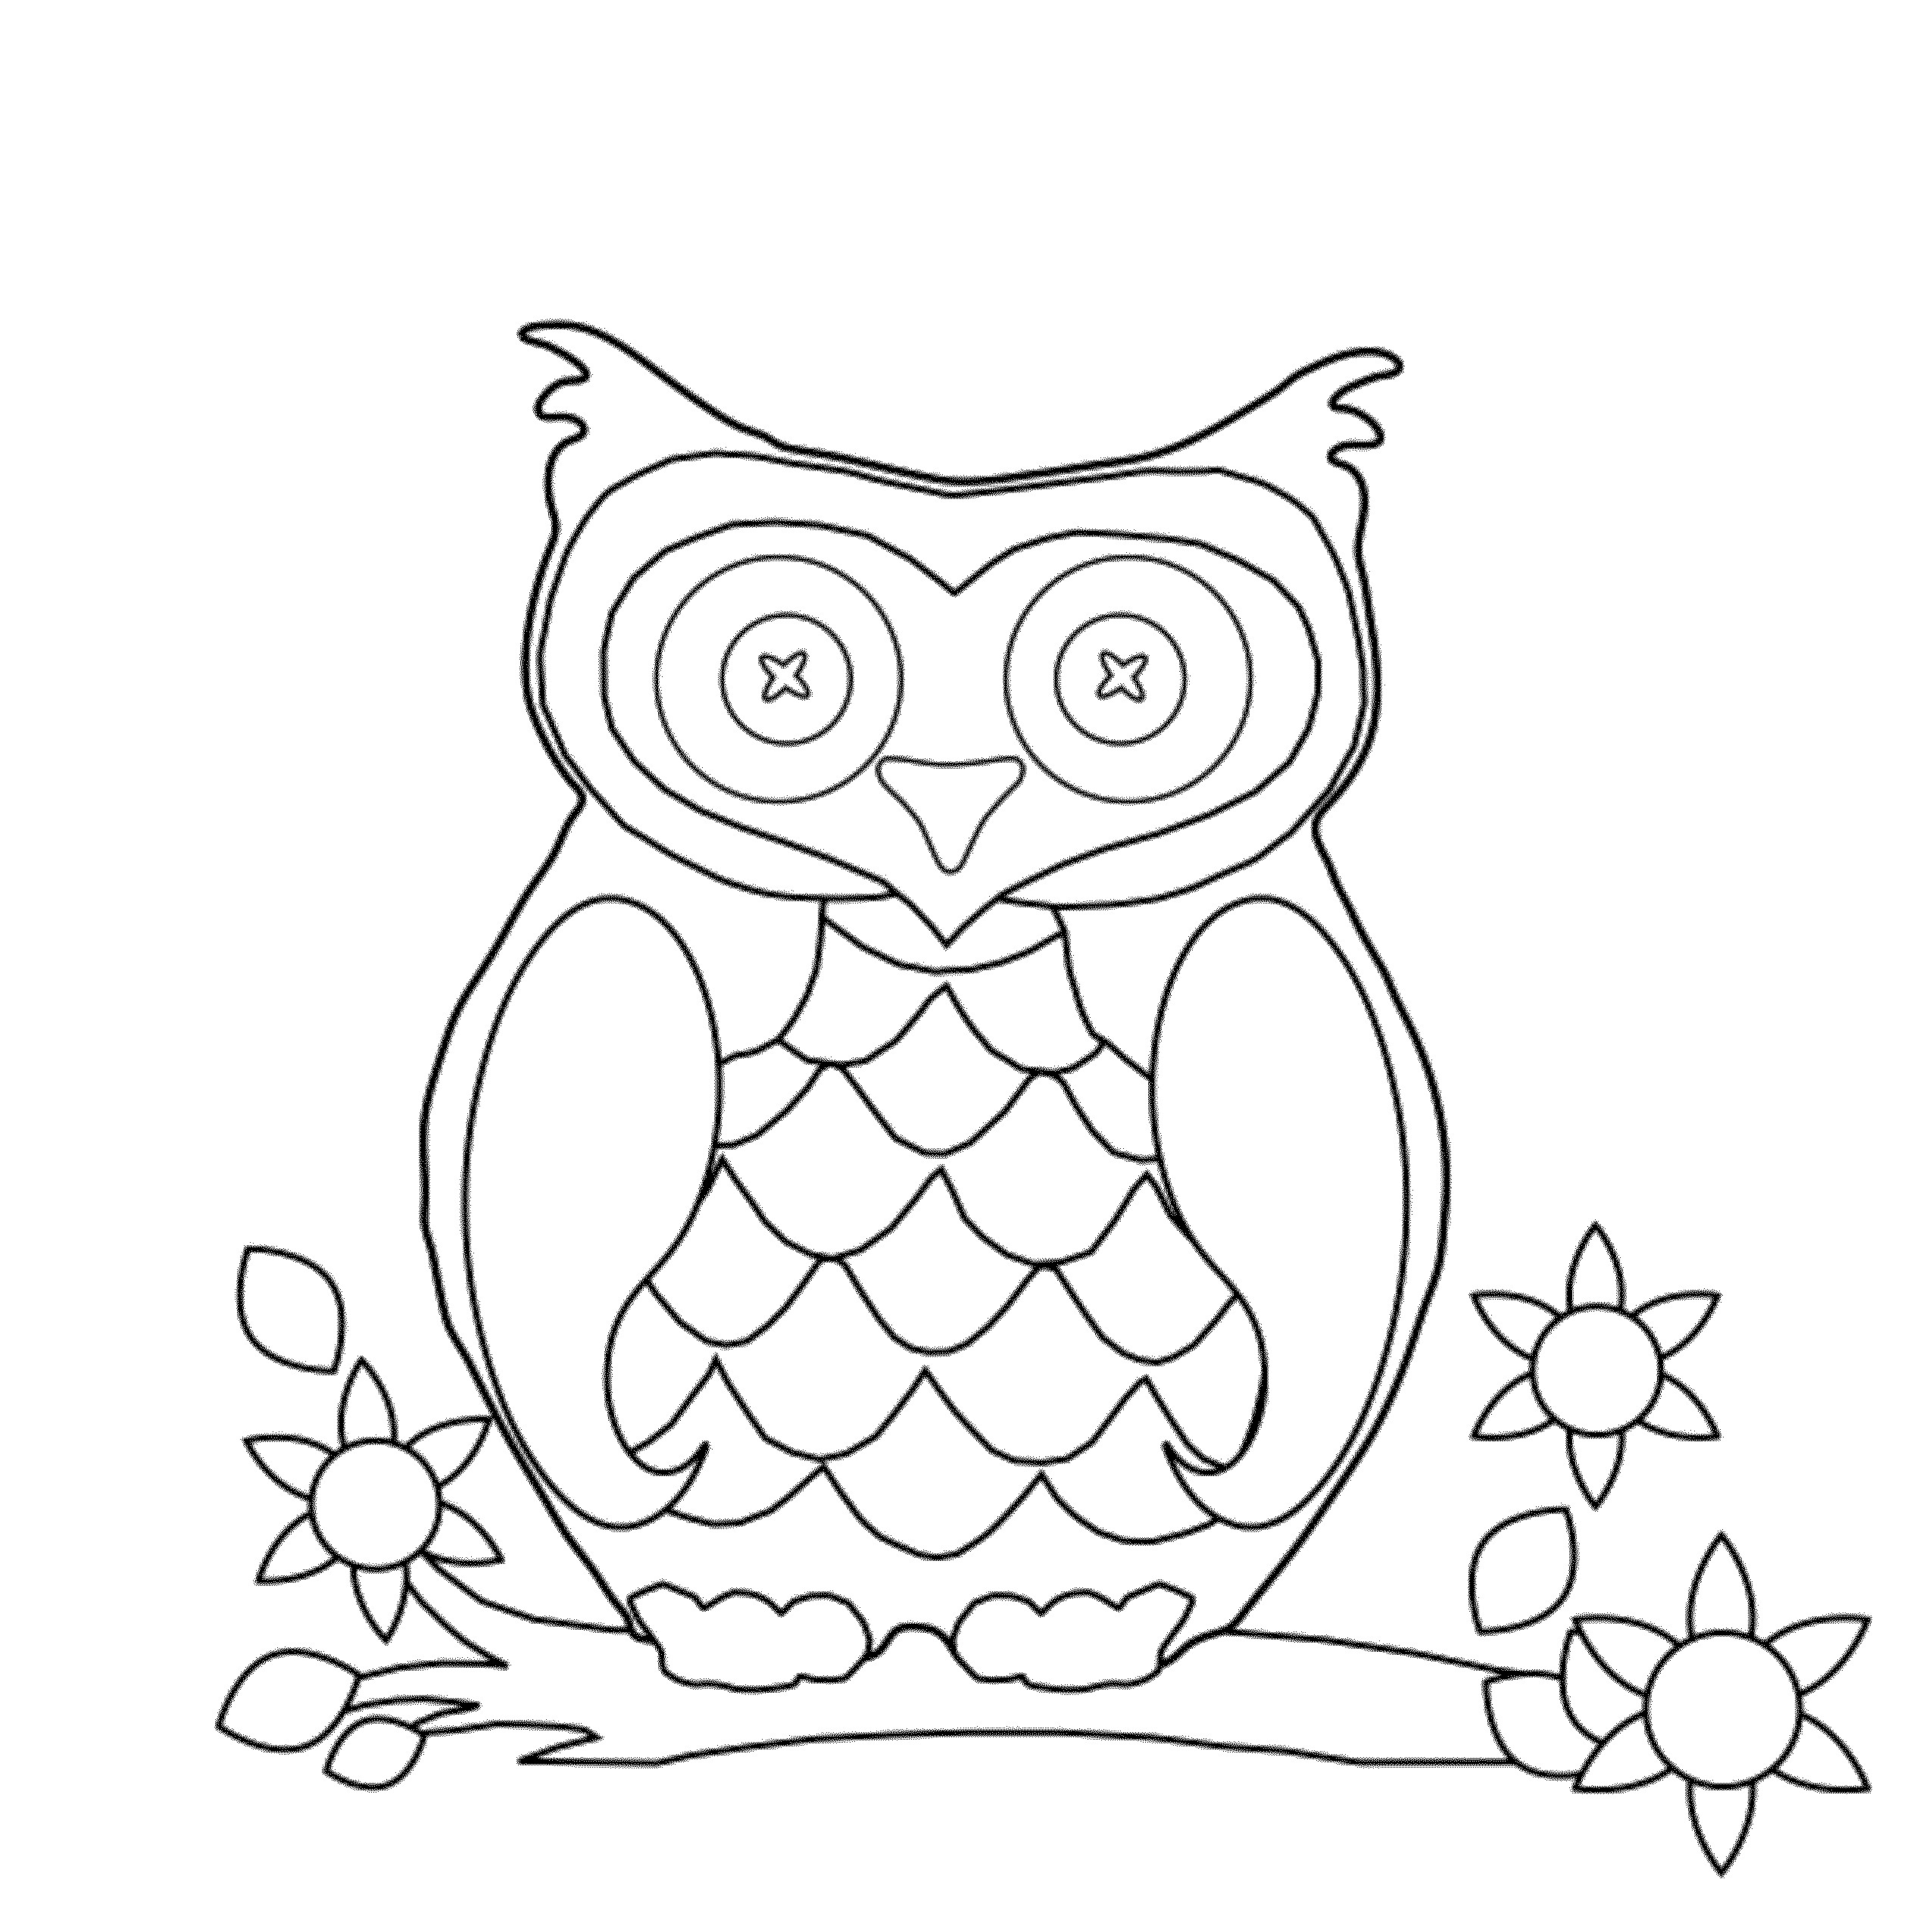 Owl Coloring Pages For Kids
 Print & Download Owl Coloring Pages for Your Kids